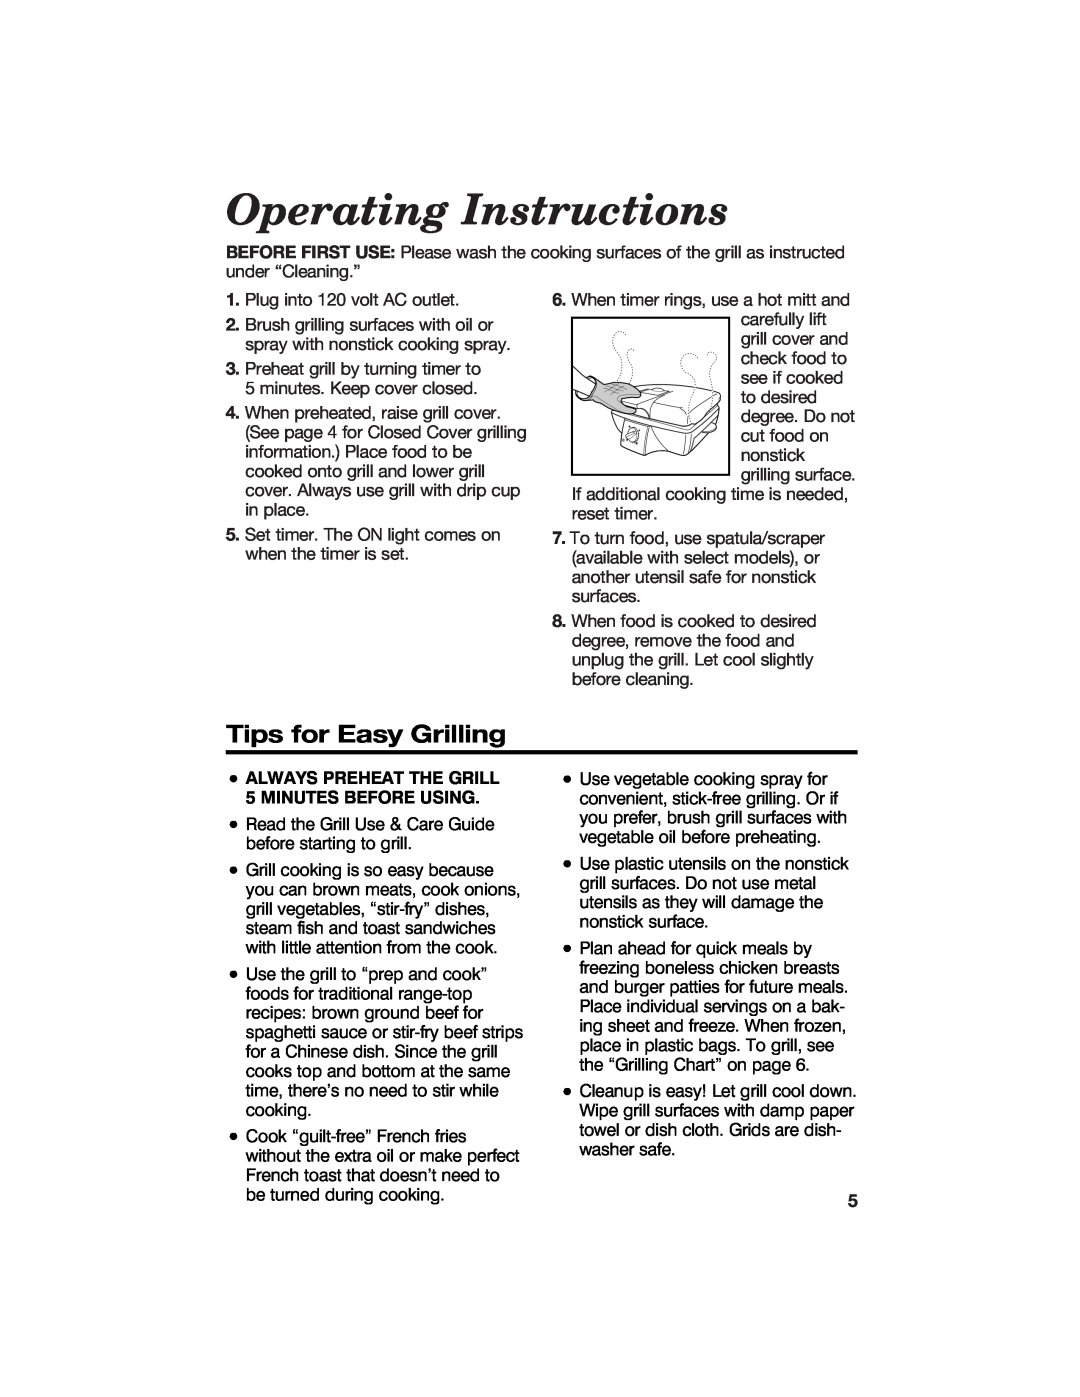 Hamilton Beach 840125300 Operating Instructions, Tips for Easy Grilling, ALWAYS PREHEAT THE GRILL 5 MINUTES BEFORE USING 